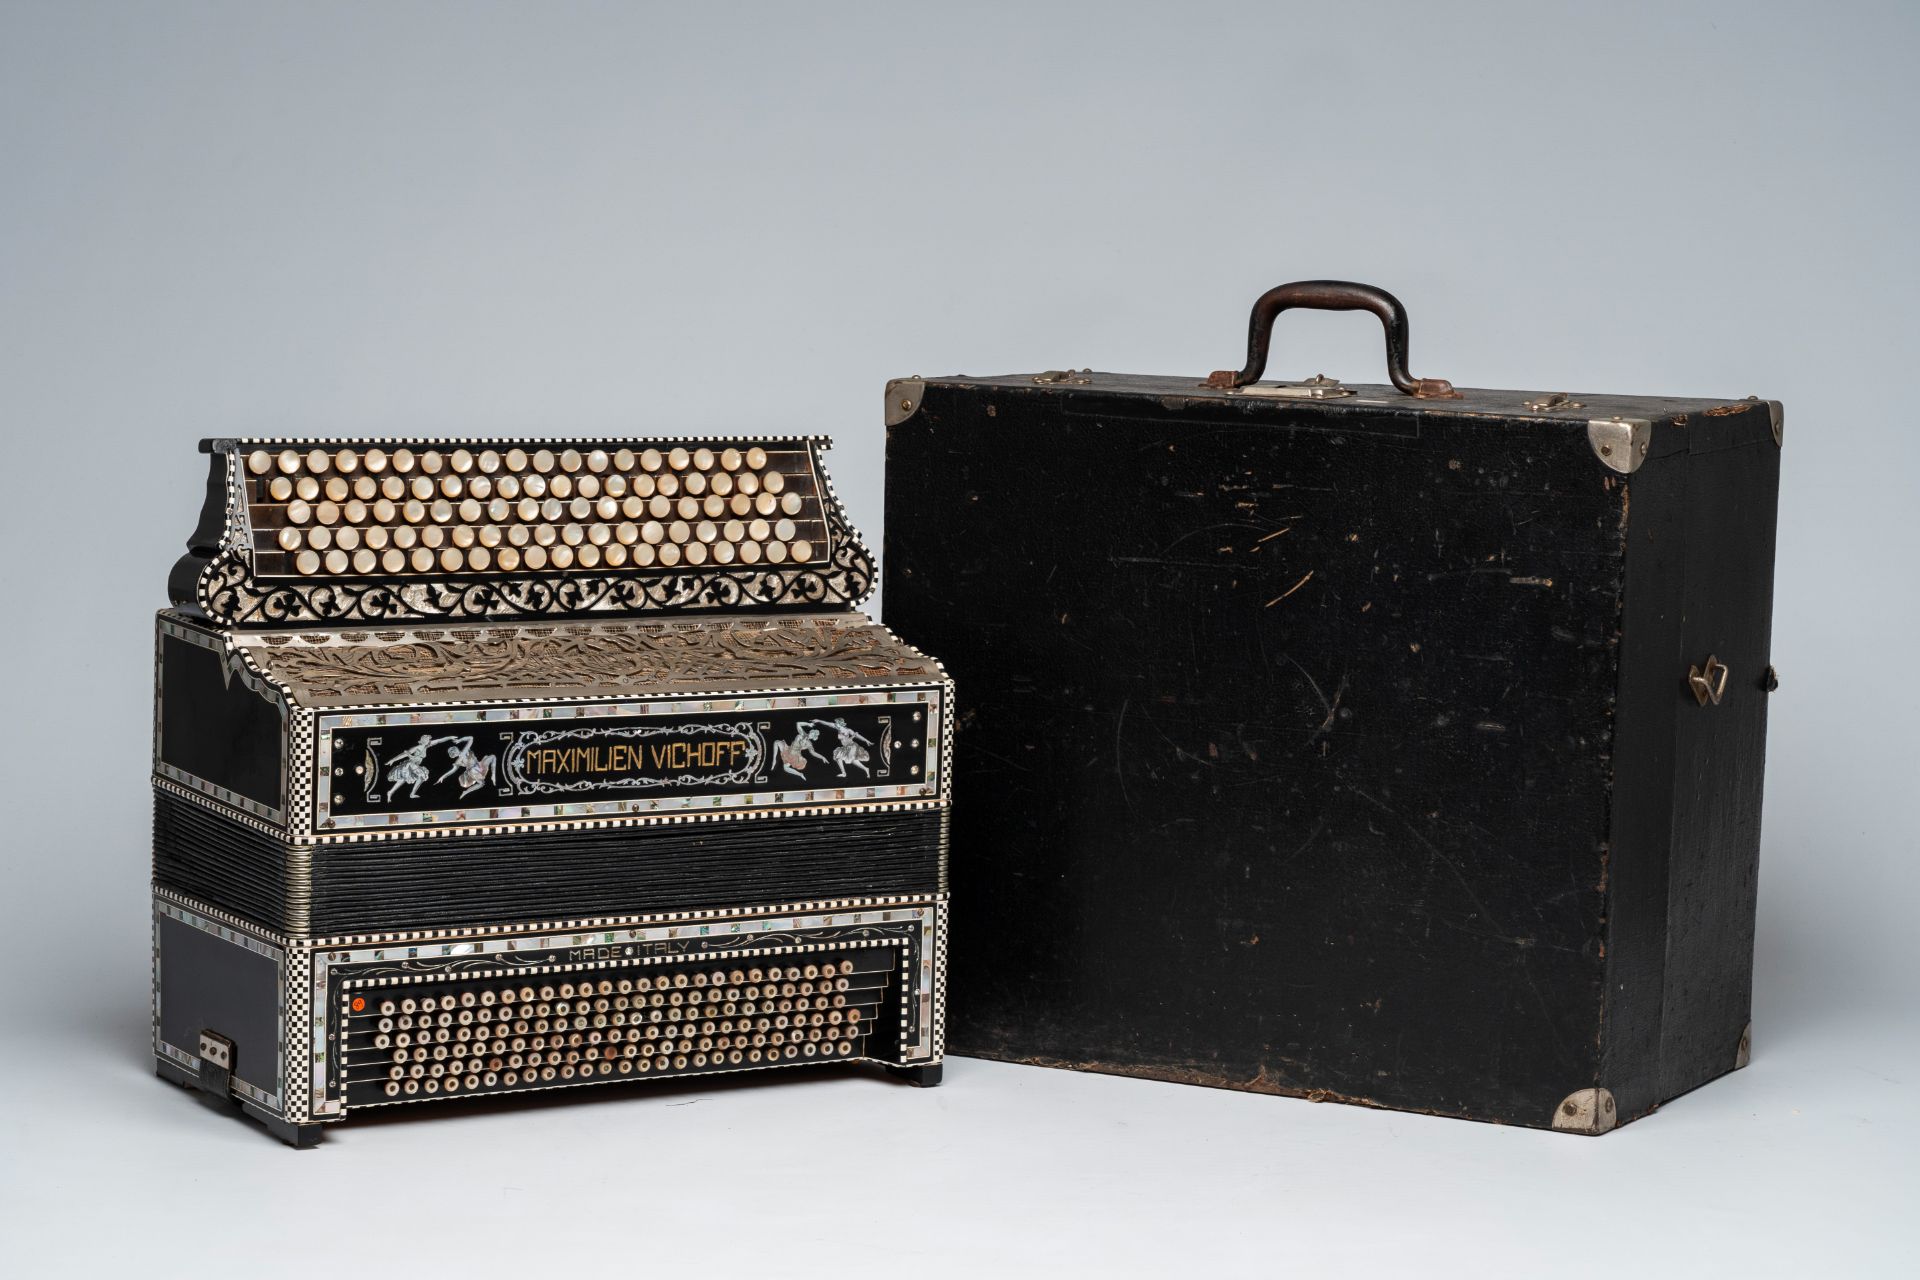 An Italian 'Maximilien Vichoff' chromatic accordion with button keyboard and box, ca. 1930